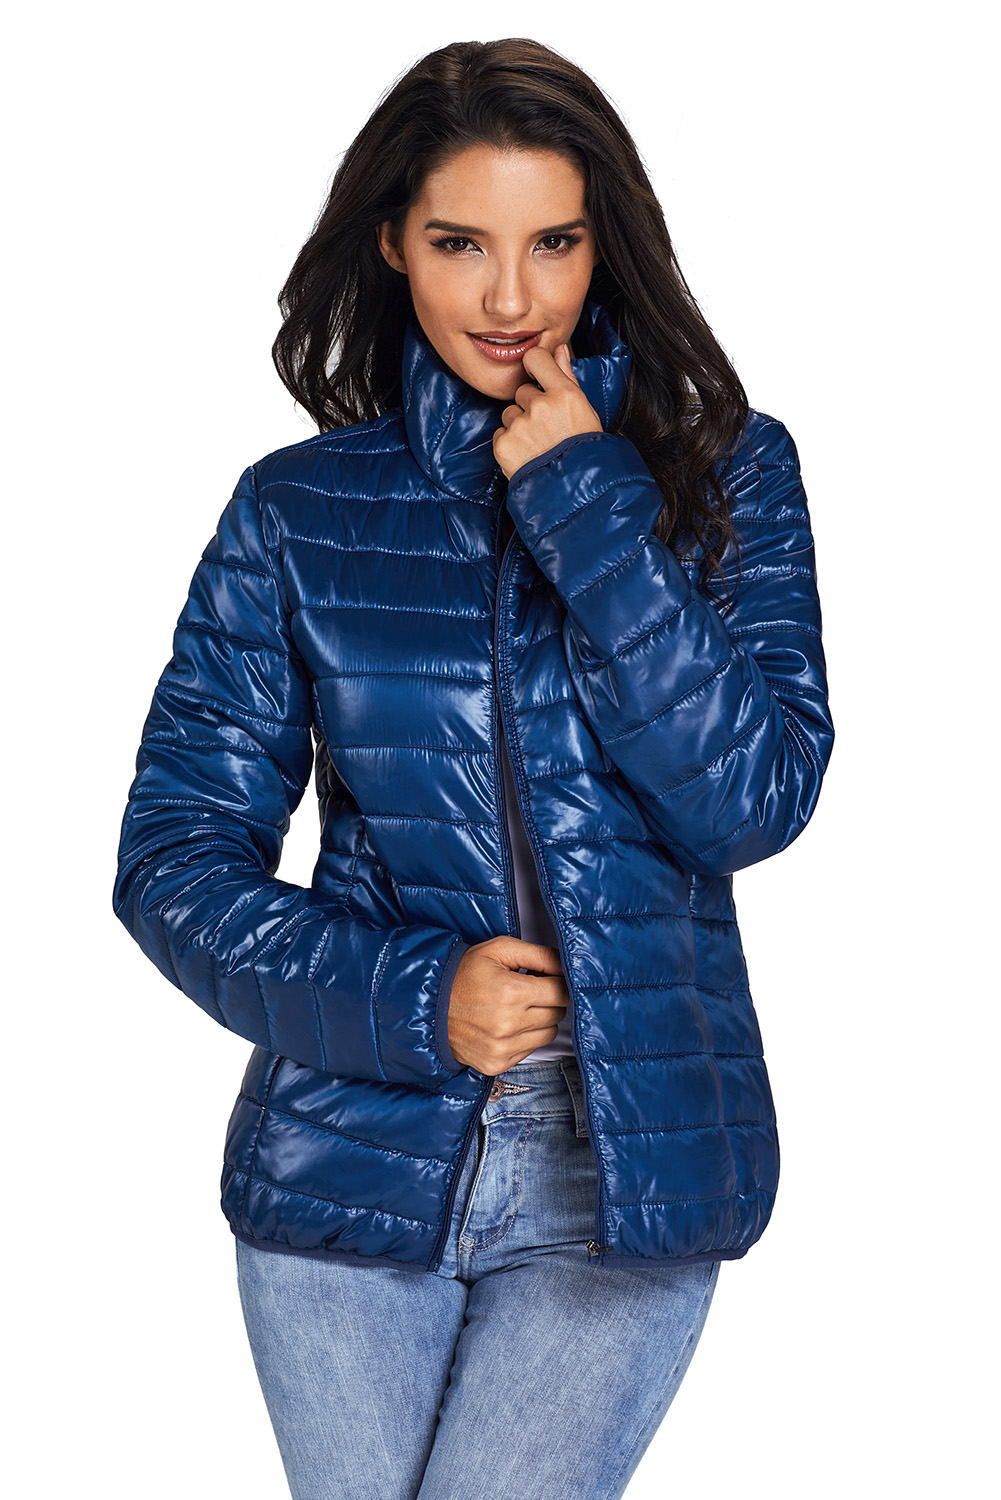 BY85126-5 Blue High Neck Quilted Cotton Jacket